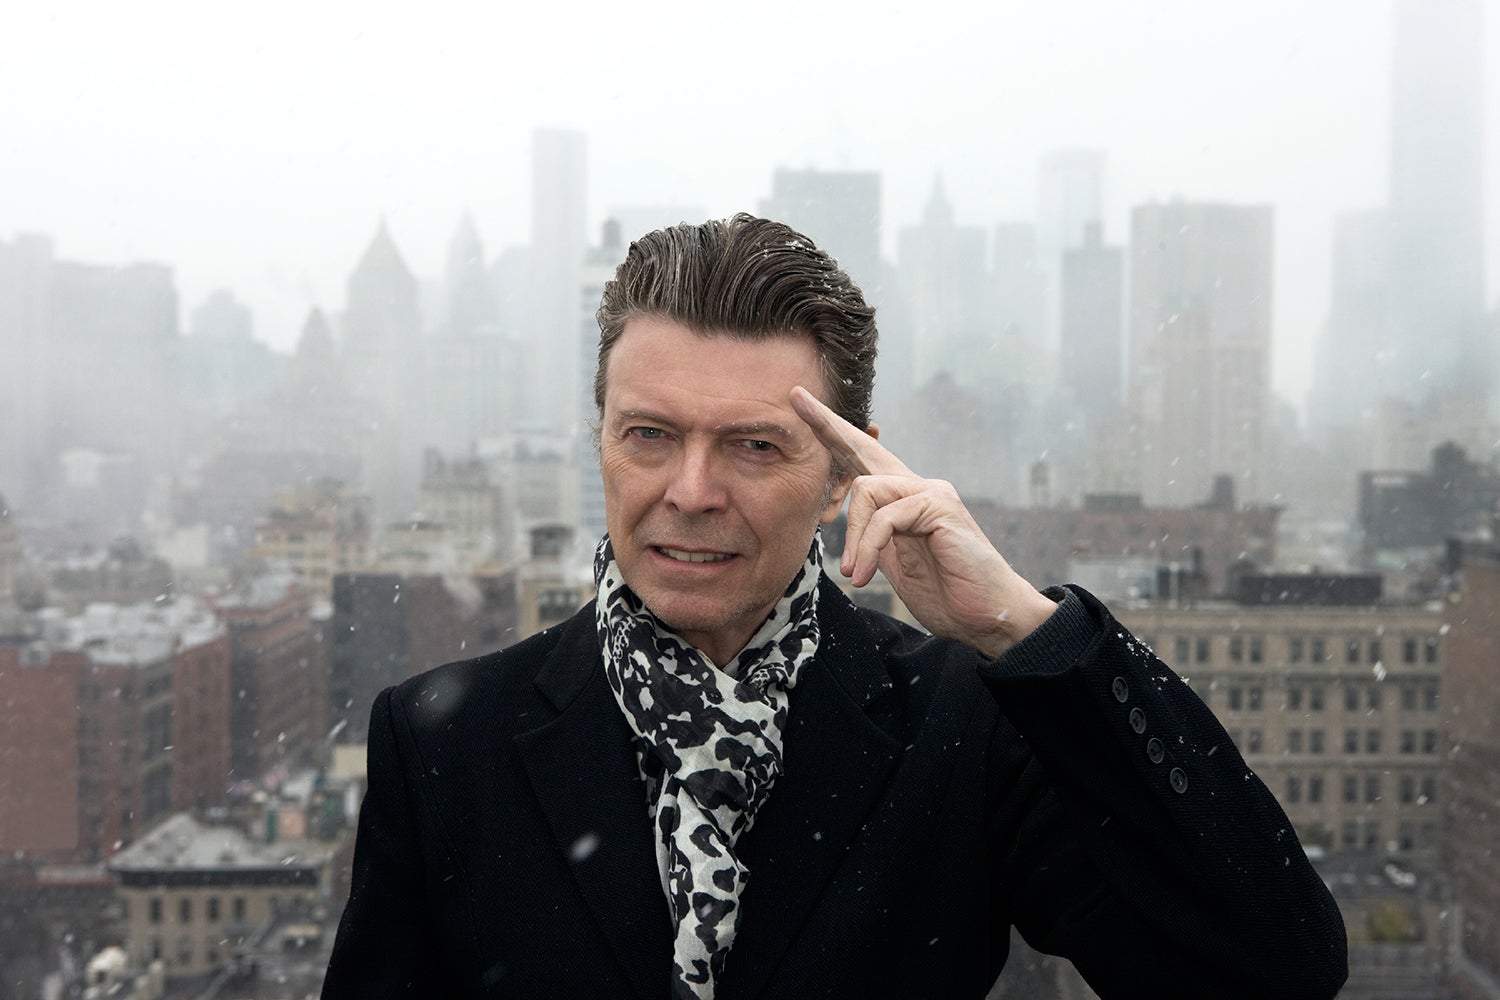 David Bowie Dead at 69 from Cancer